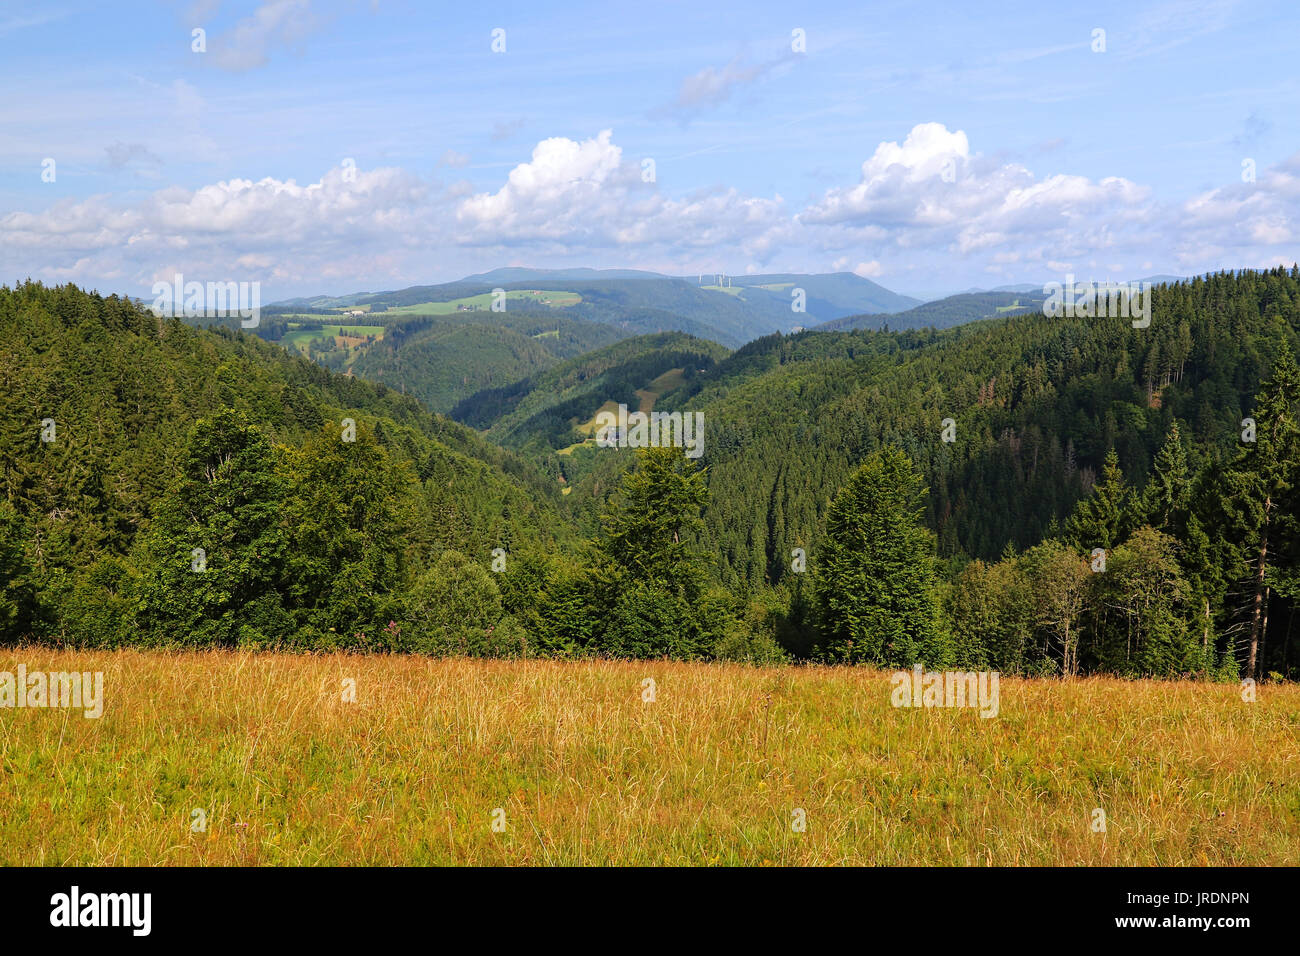 Scenic countryside landscape in the Black Forest: green summer mountain valley with forests, fields and old houses in Germany Stock Photo